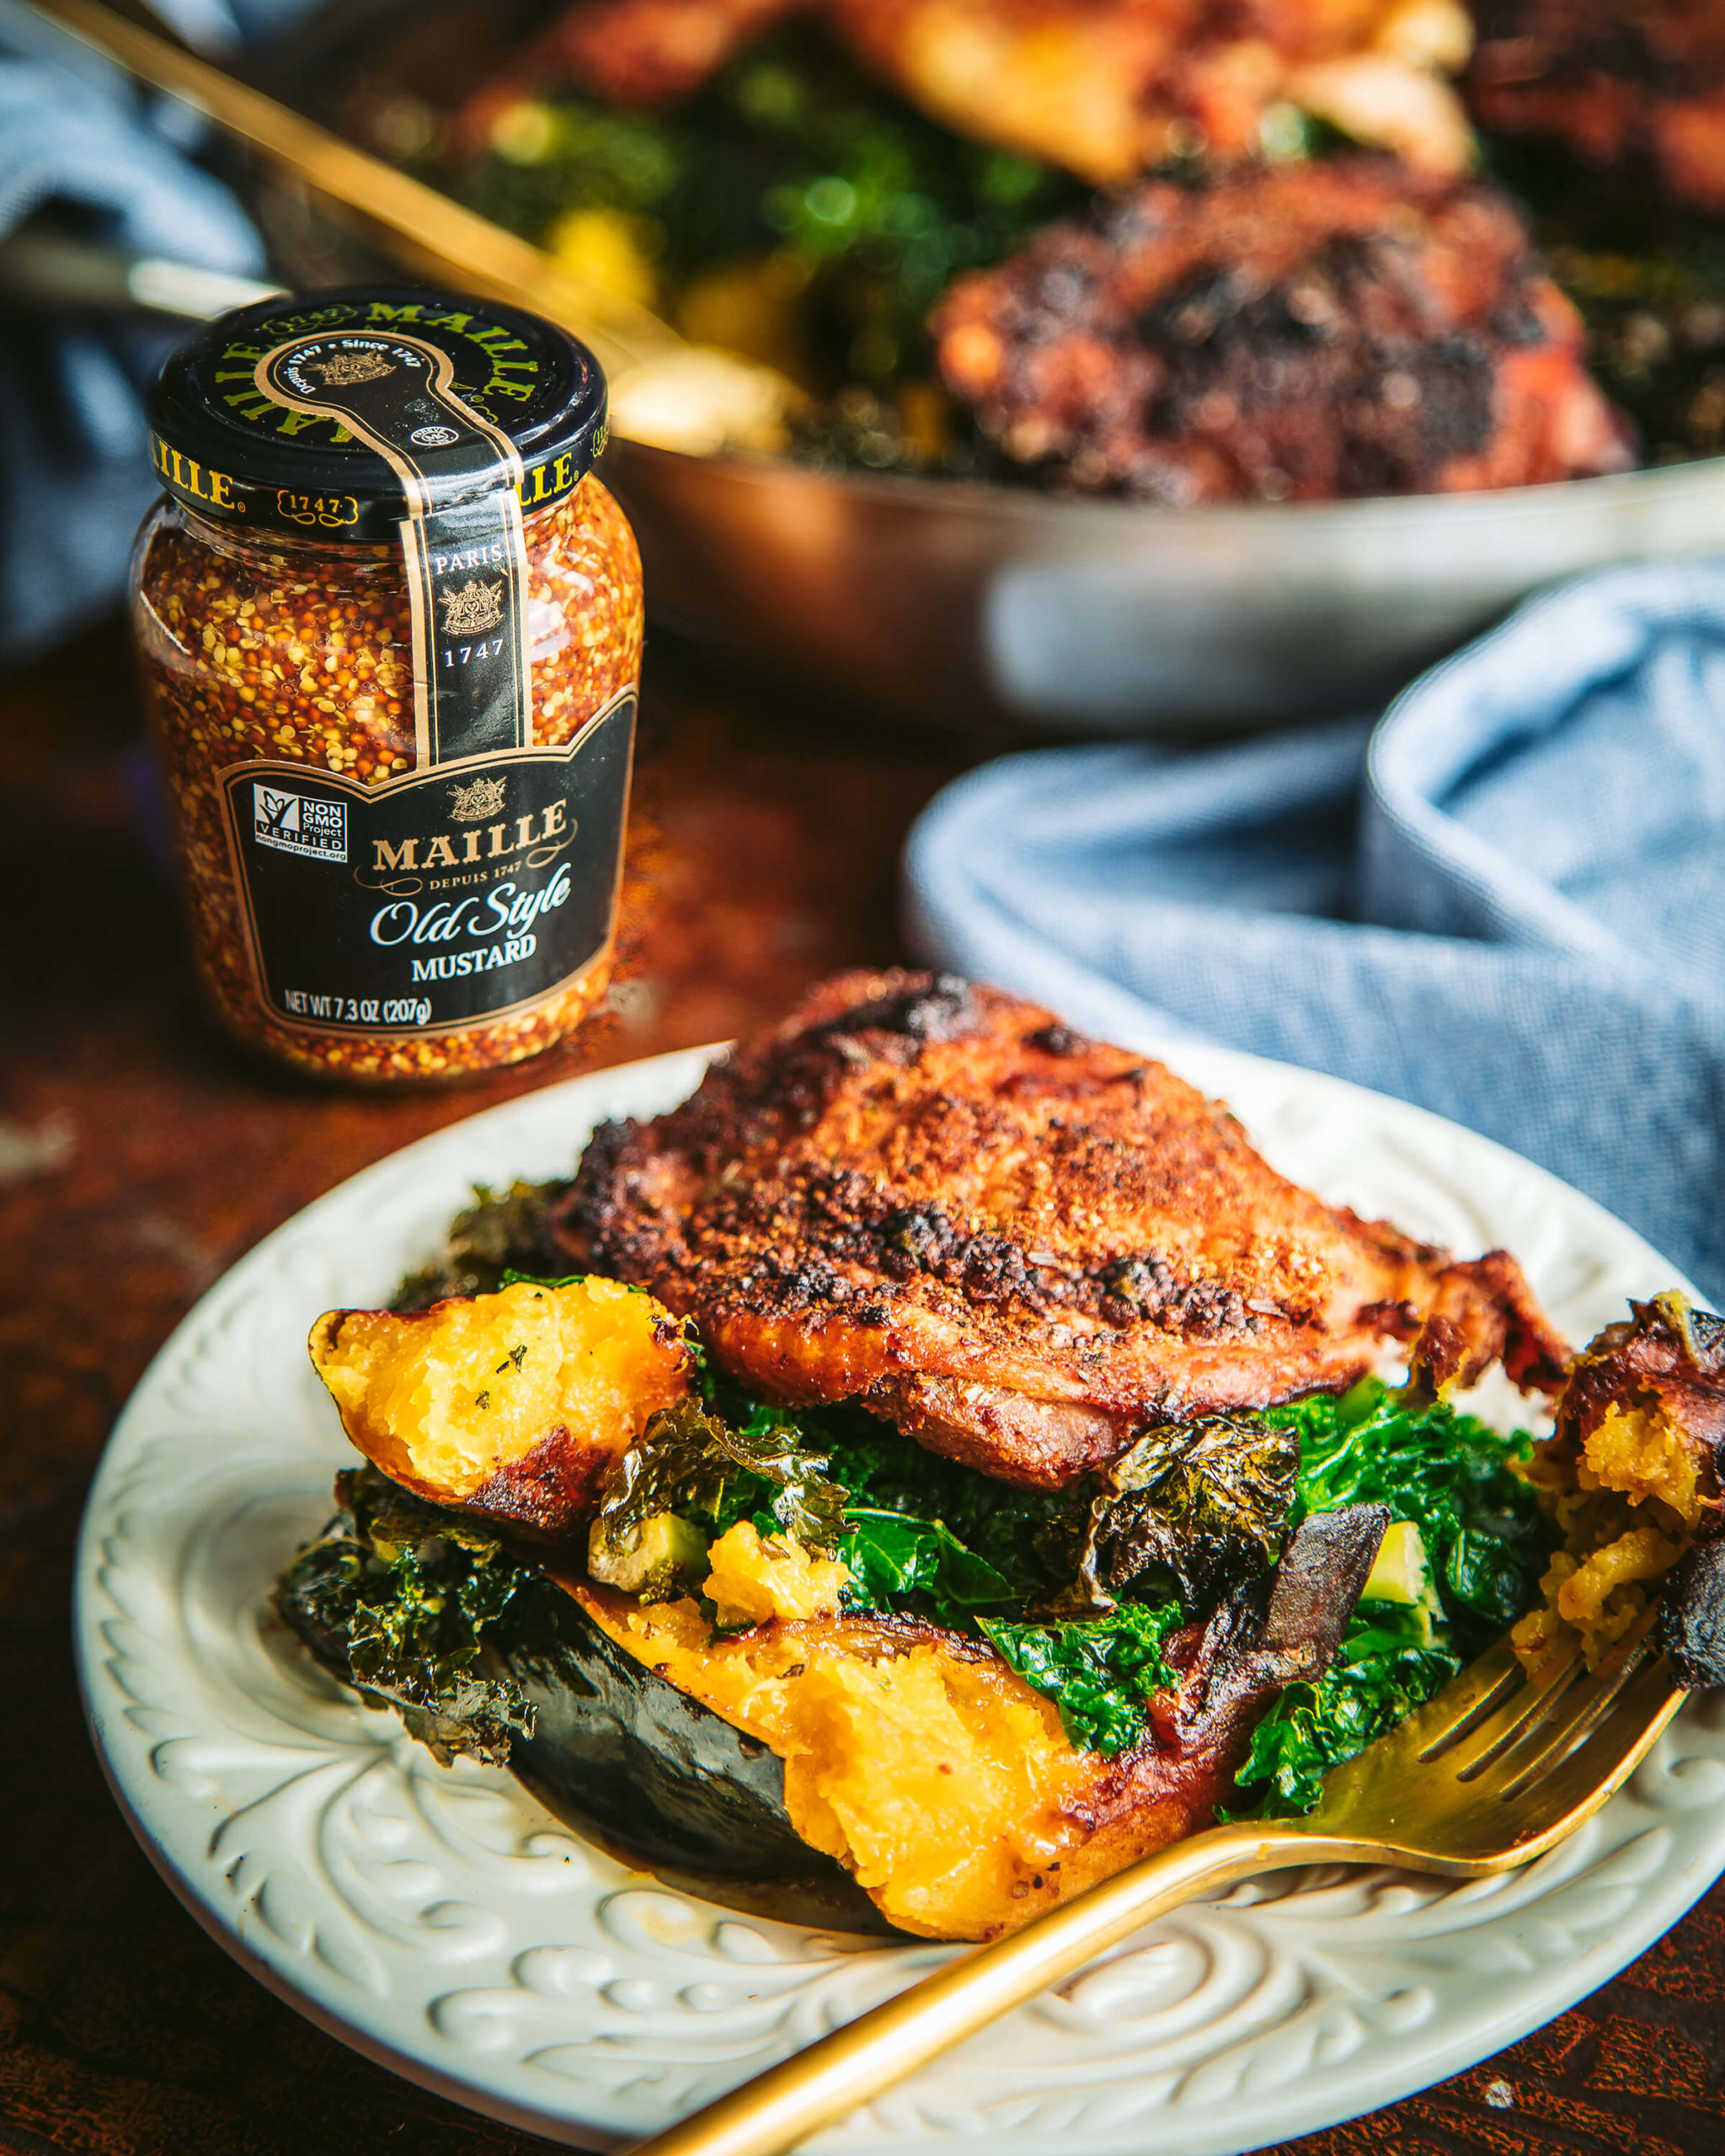 Baked Chicken Thighs with Kale and Acorn Squash and Maille Old Style Mustard